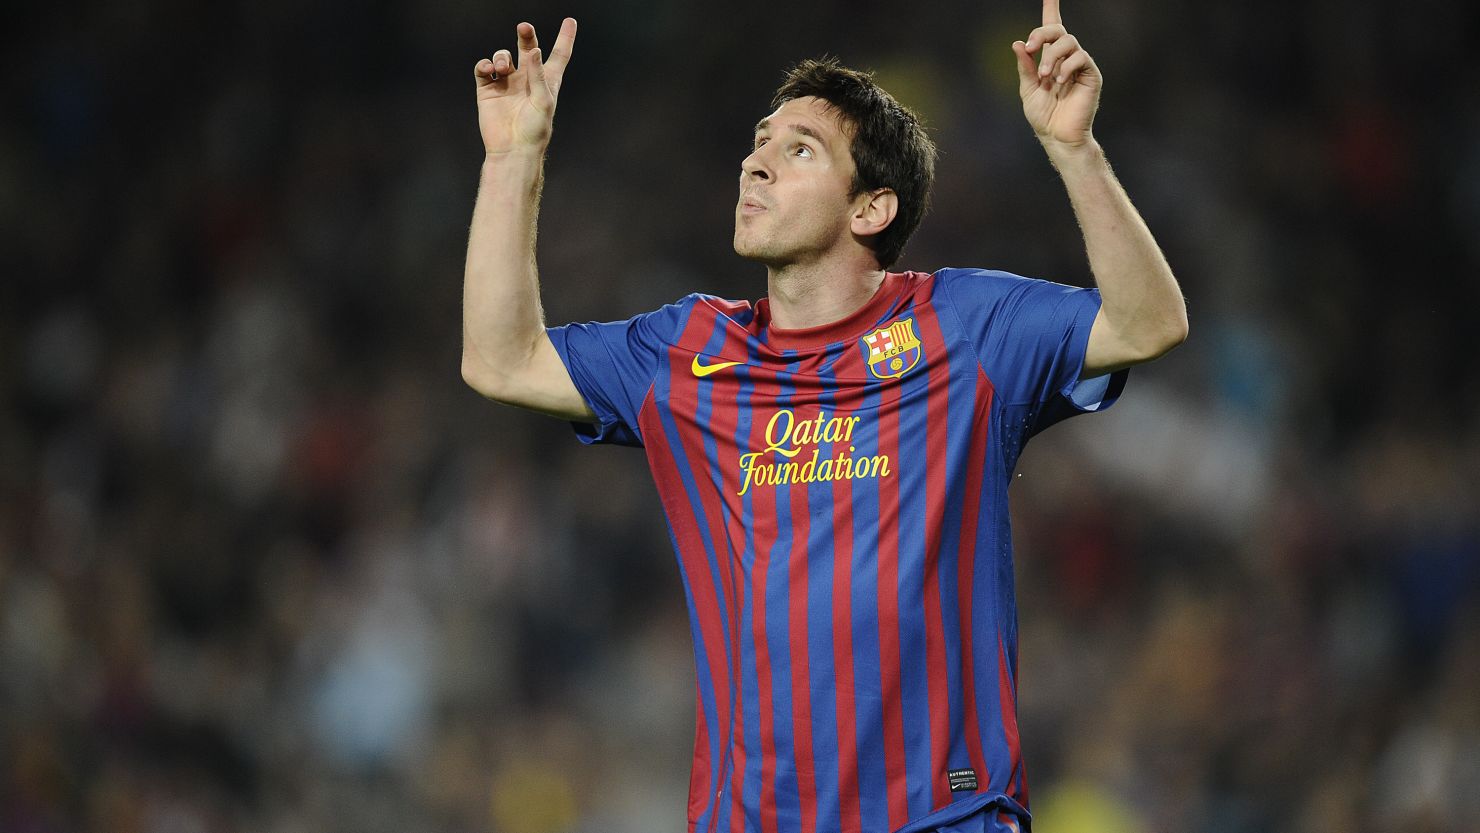 Lionel Messi celebrates scoring the opening goal in Barcelona's 5-0 defeat of Mallorca